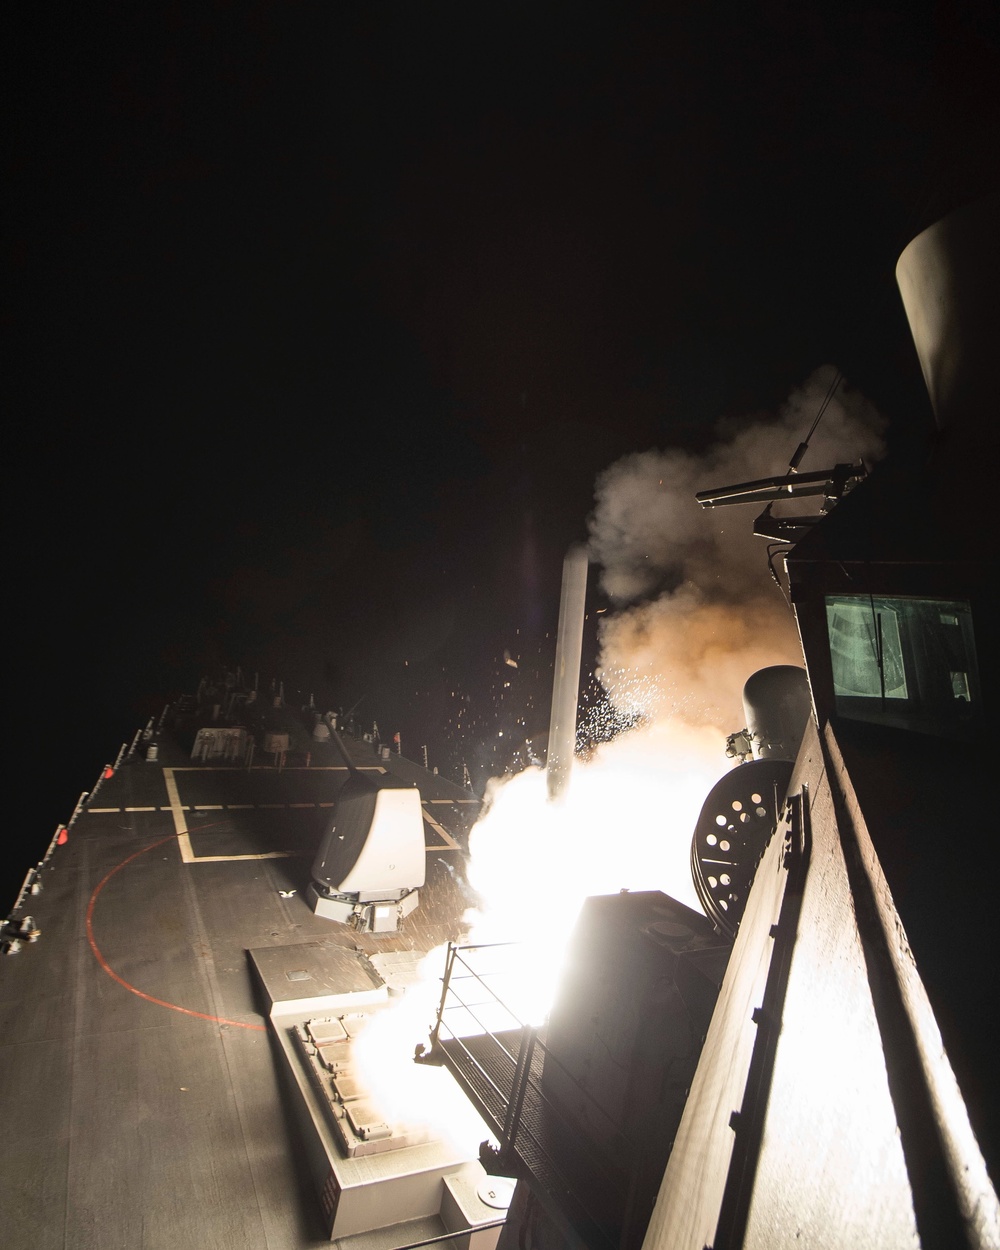 USS Ross (DDG 71) fires a tomahawk land attack missile April 7, 2017